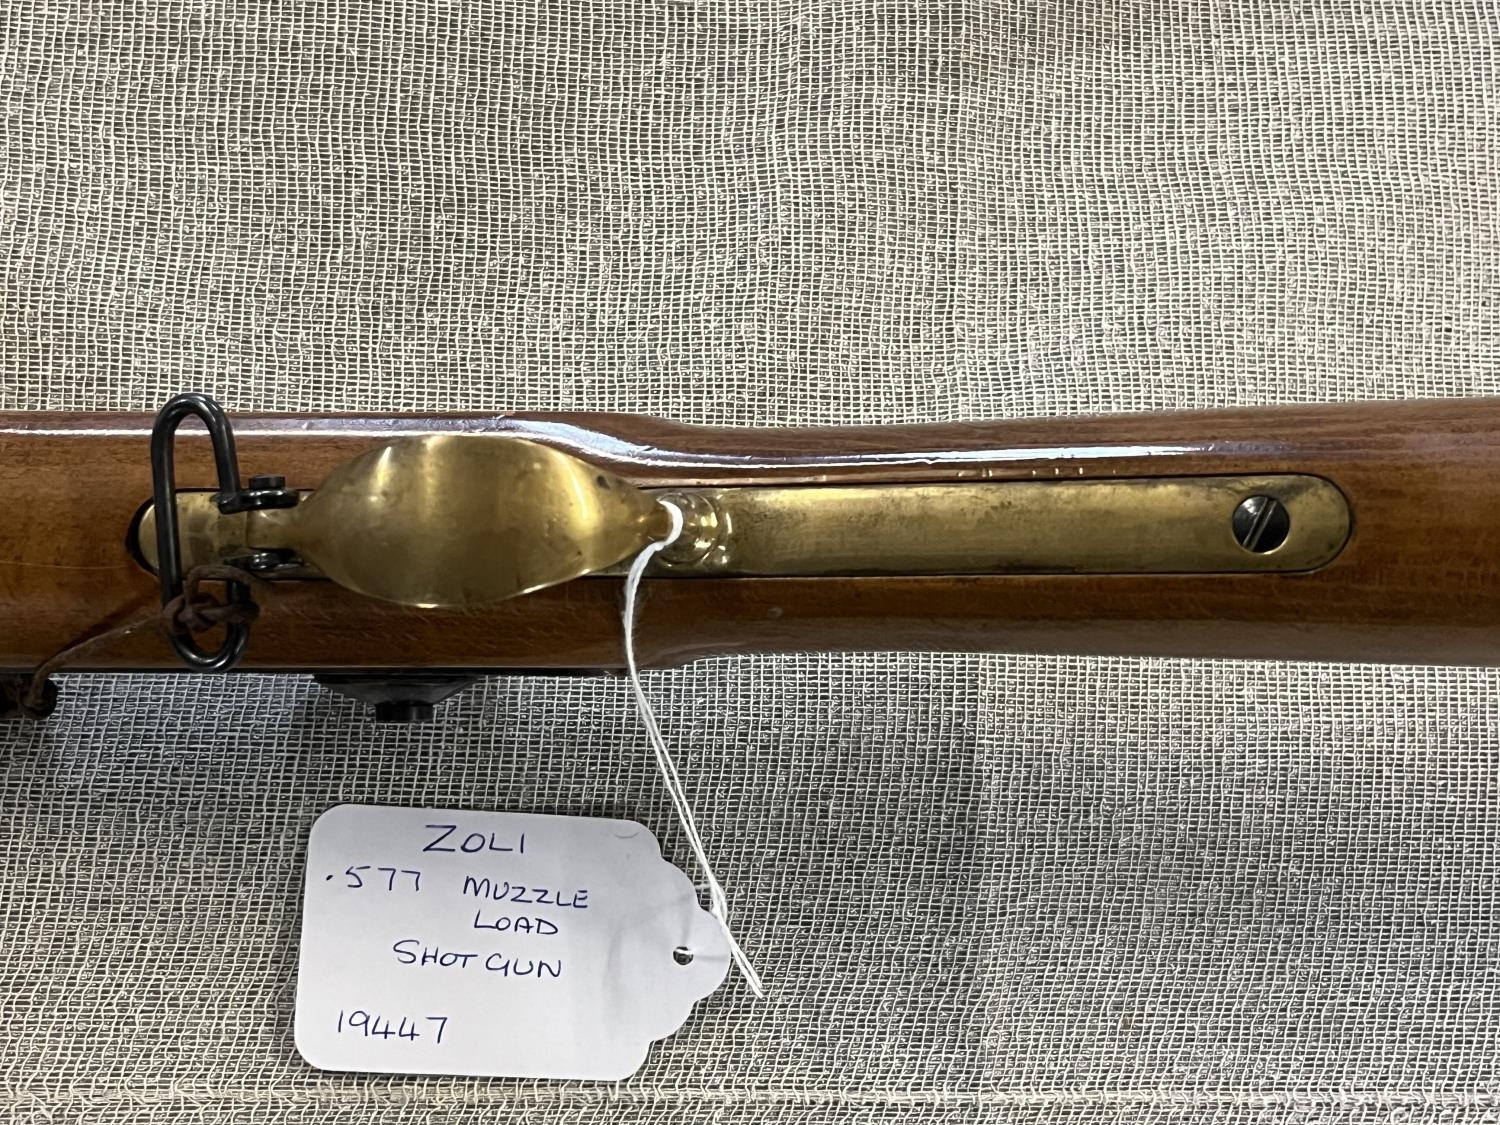 A Antonio Zoli .577 muzzle loading zouave carbine. Black powder only. Serial number 19447. Current - Image 4 of 7